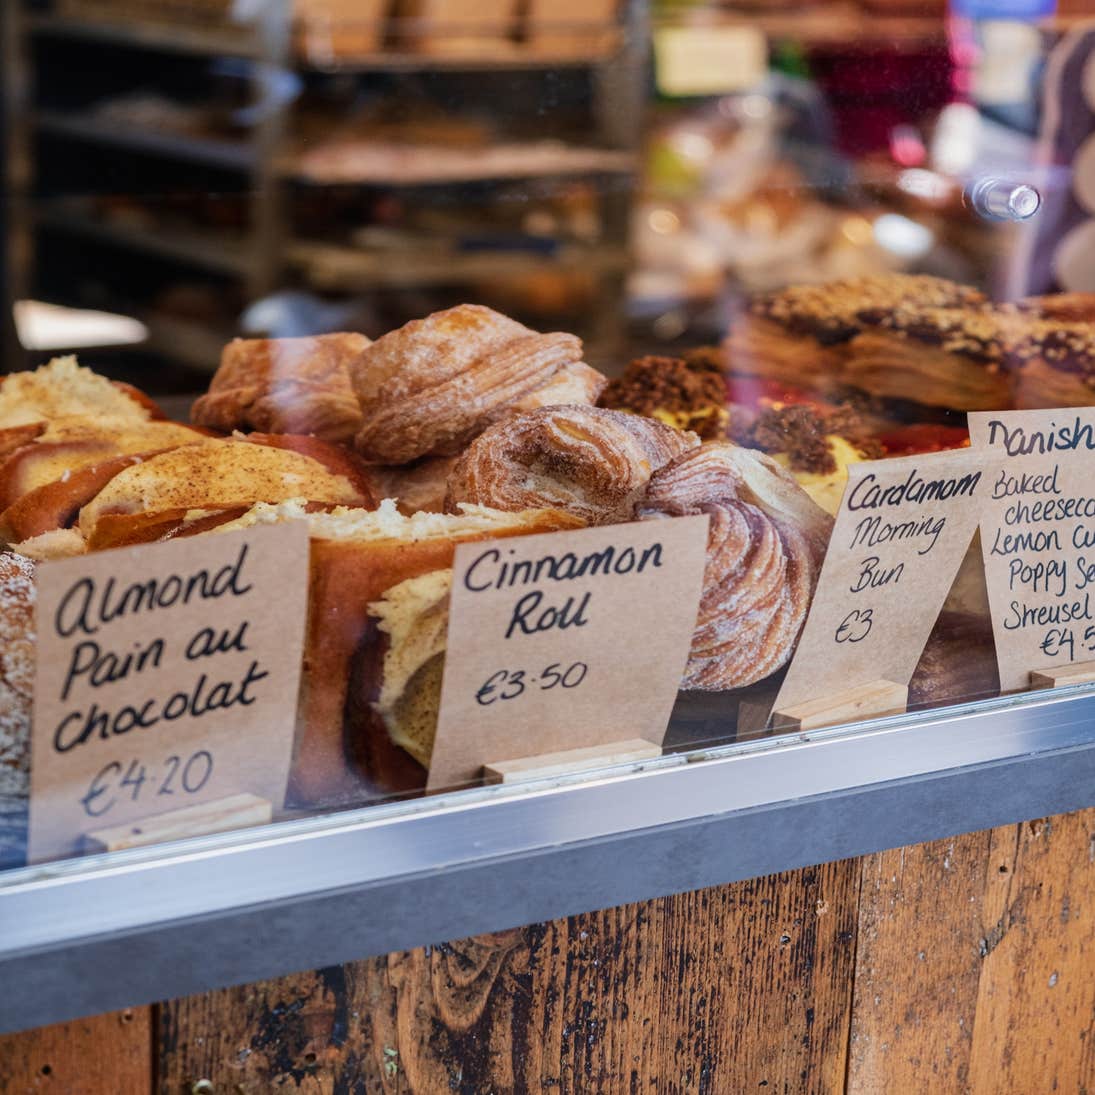 Pastries for sale in the Grumpy Baker in Midleton, County Cork.